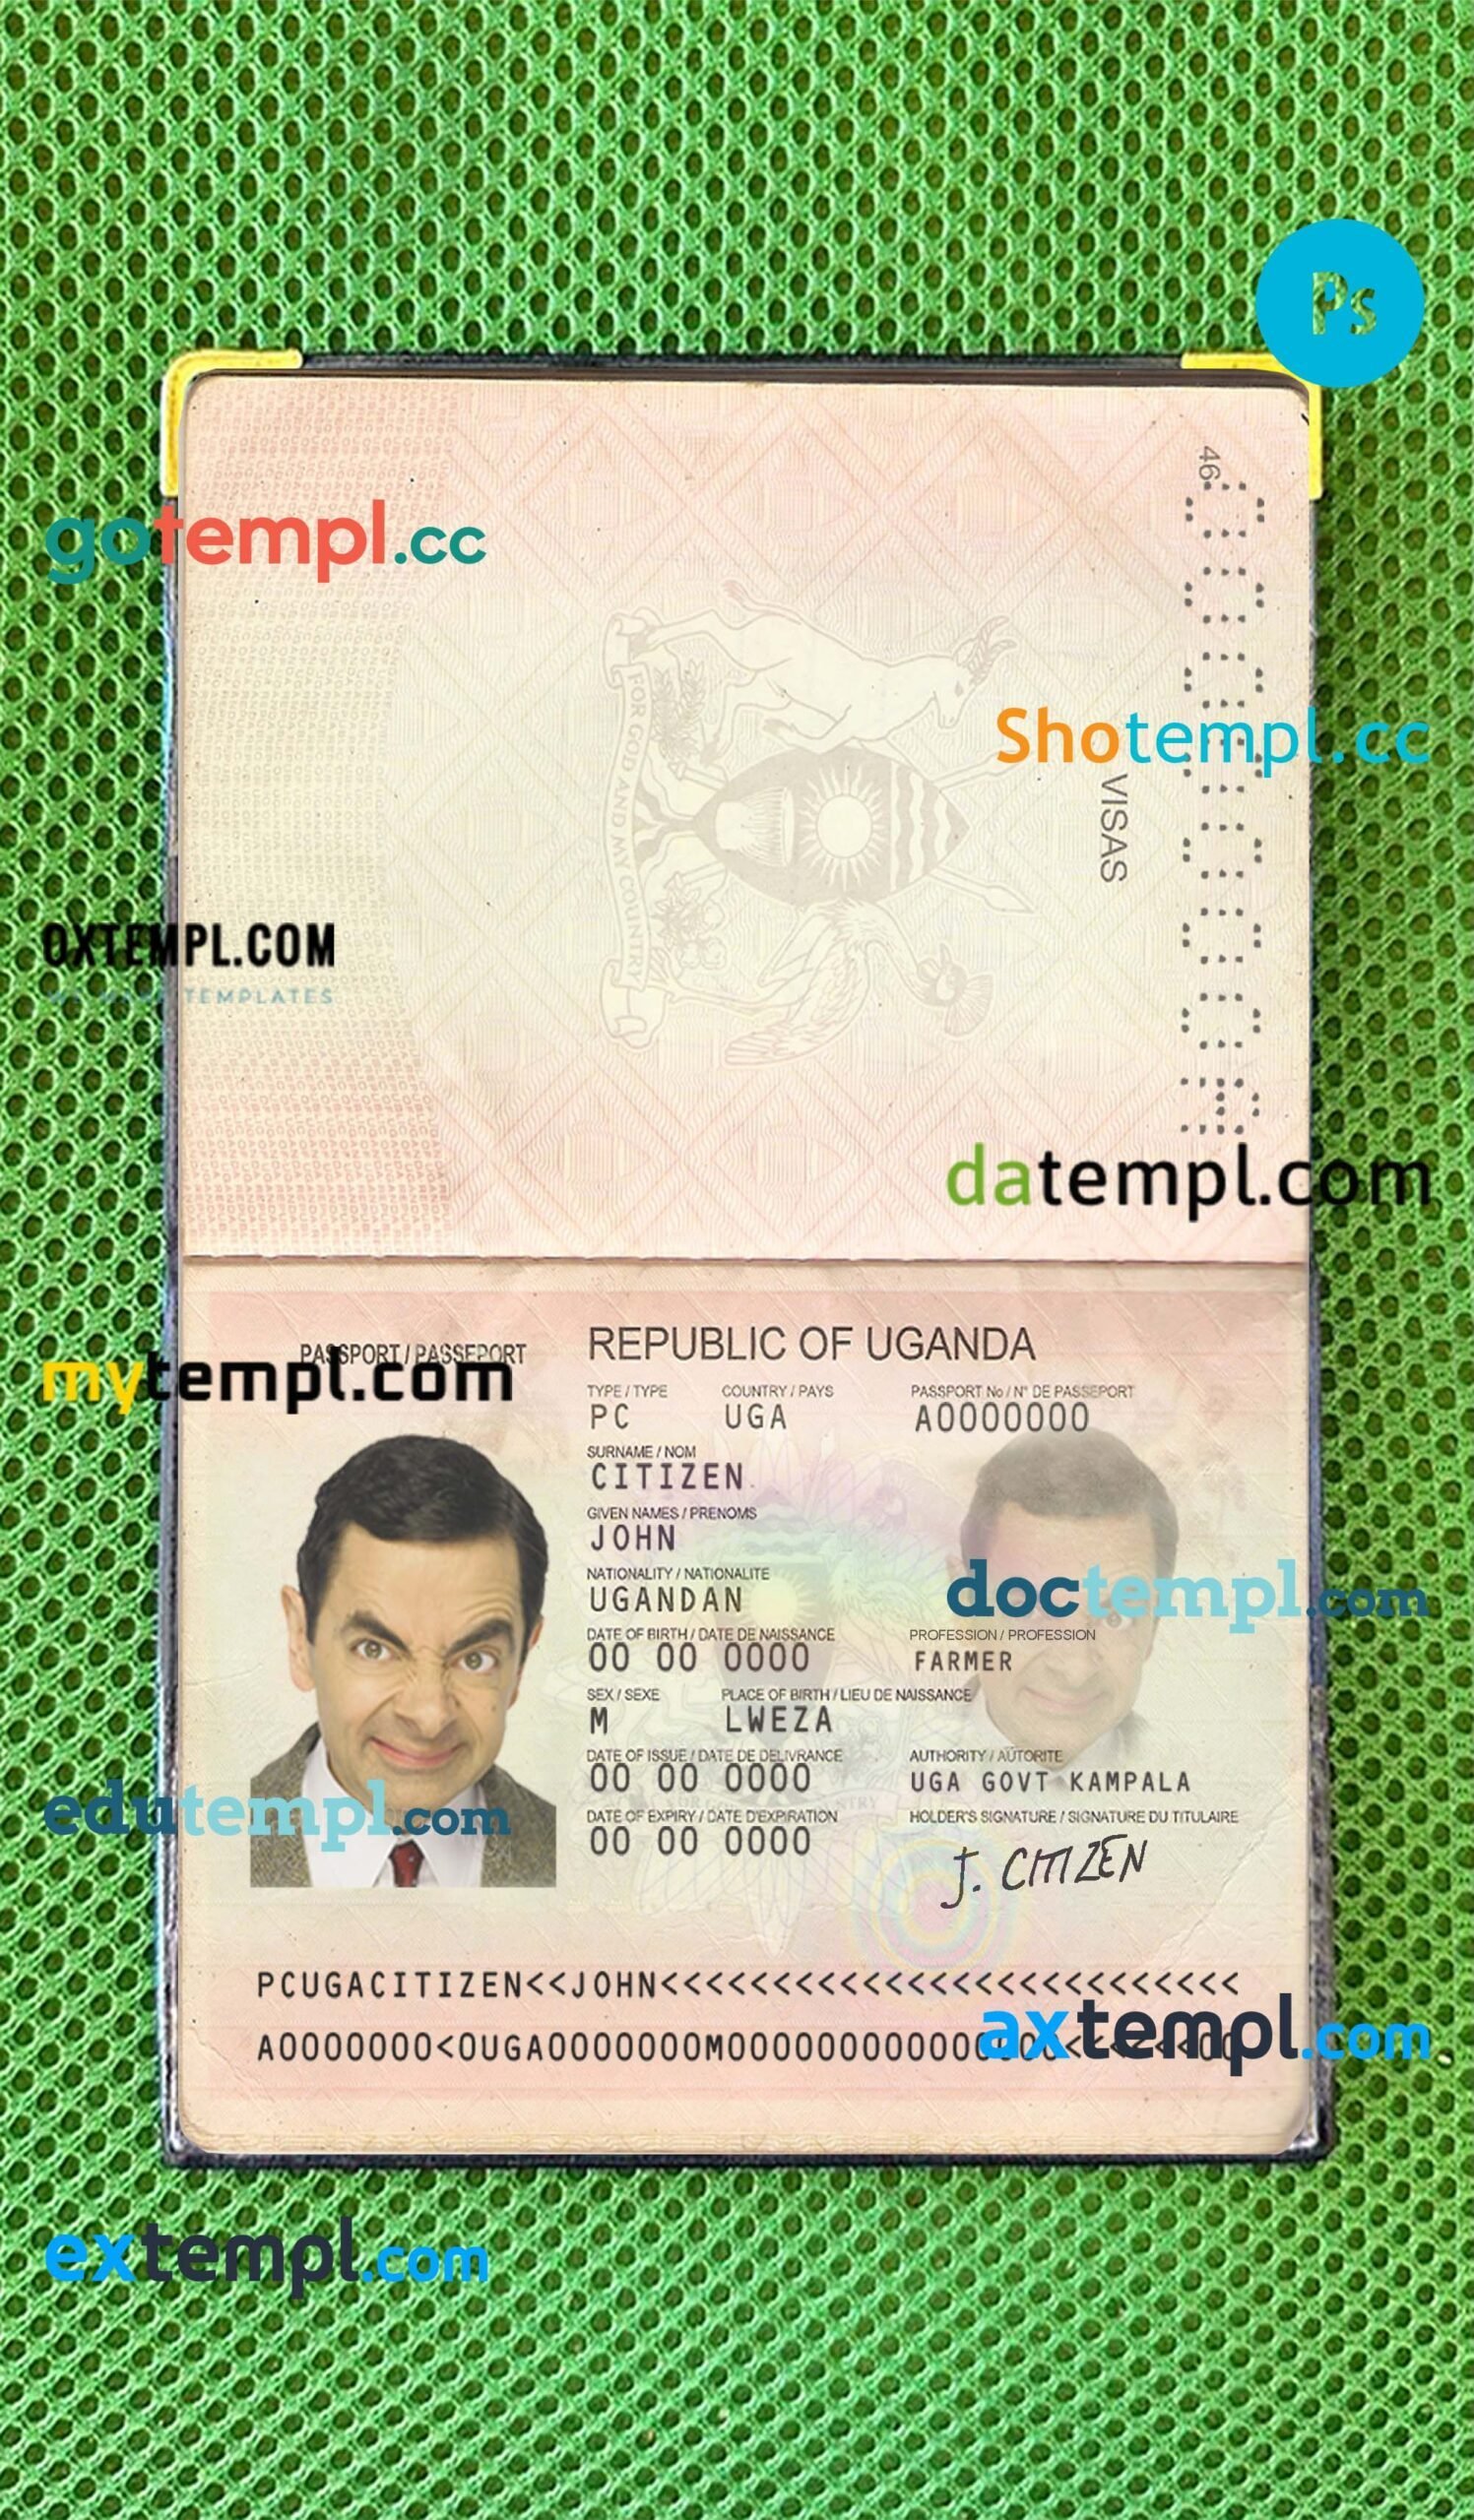 New Zealand passport editable PSD files, scan and photo taken image (2005-present), 2 in 1